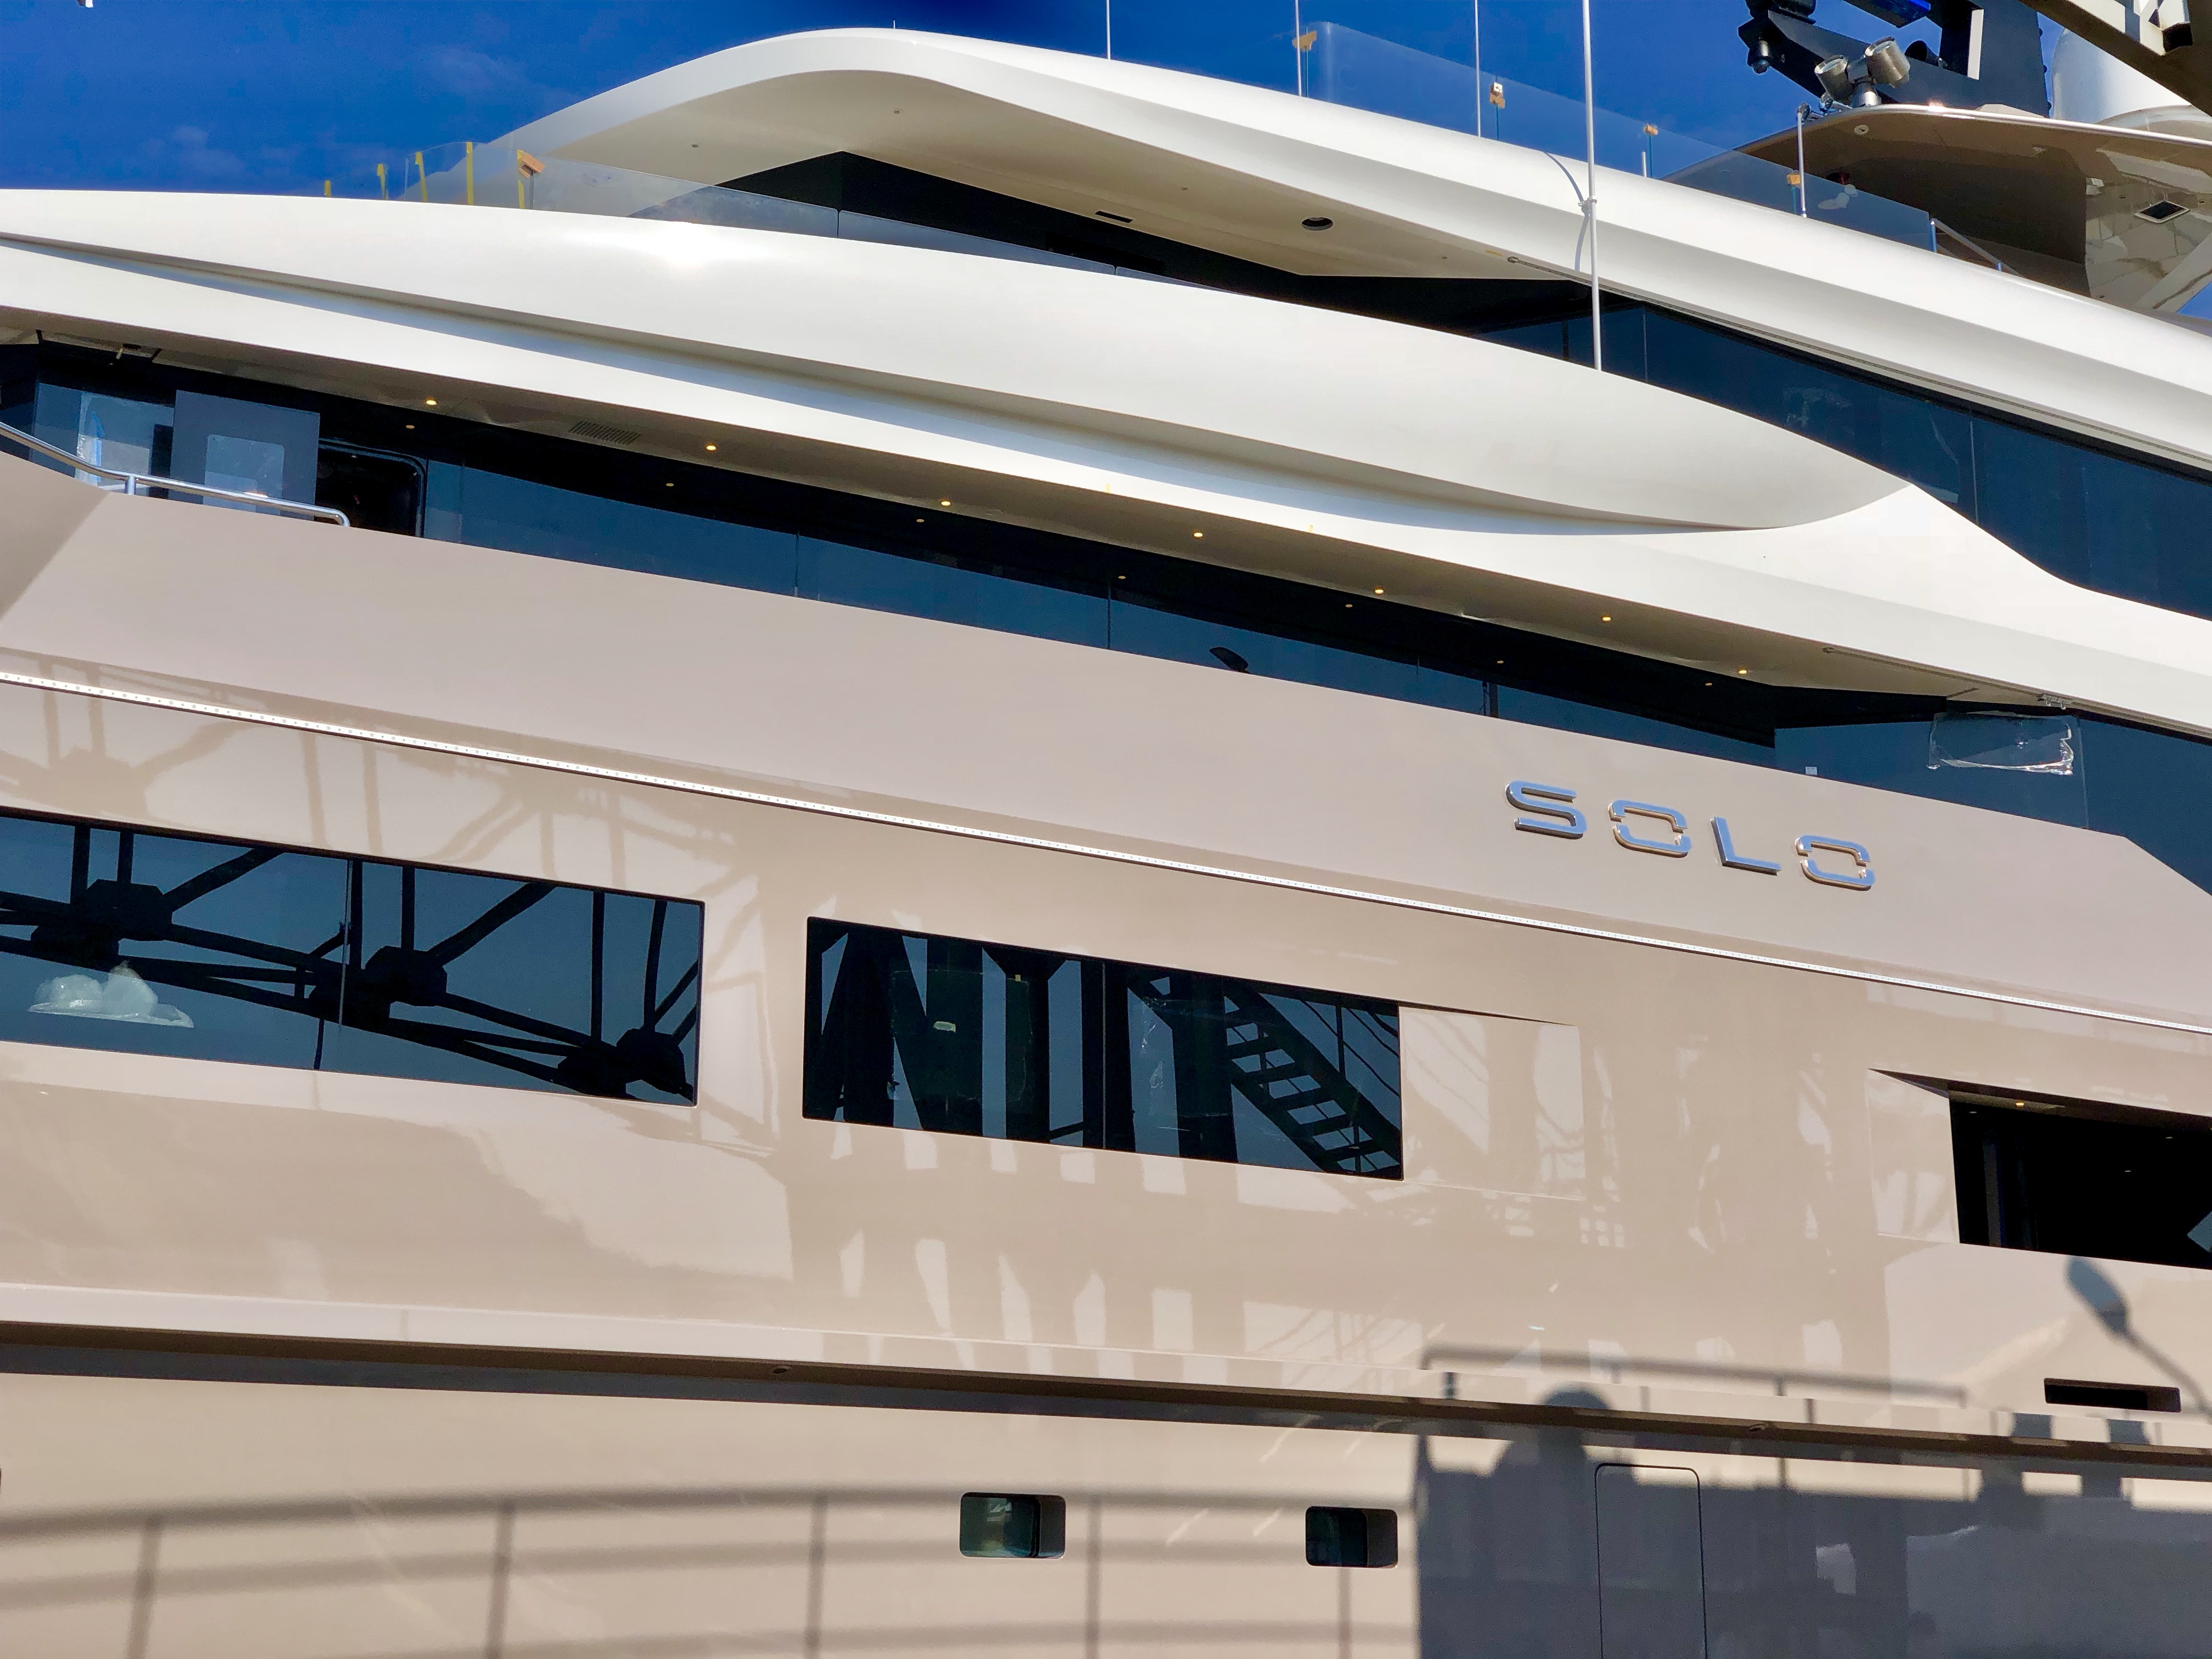 Motor Yacht SOLO - Close-up